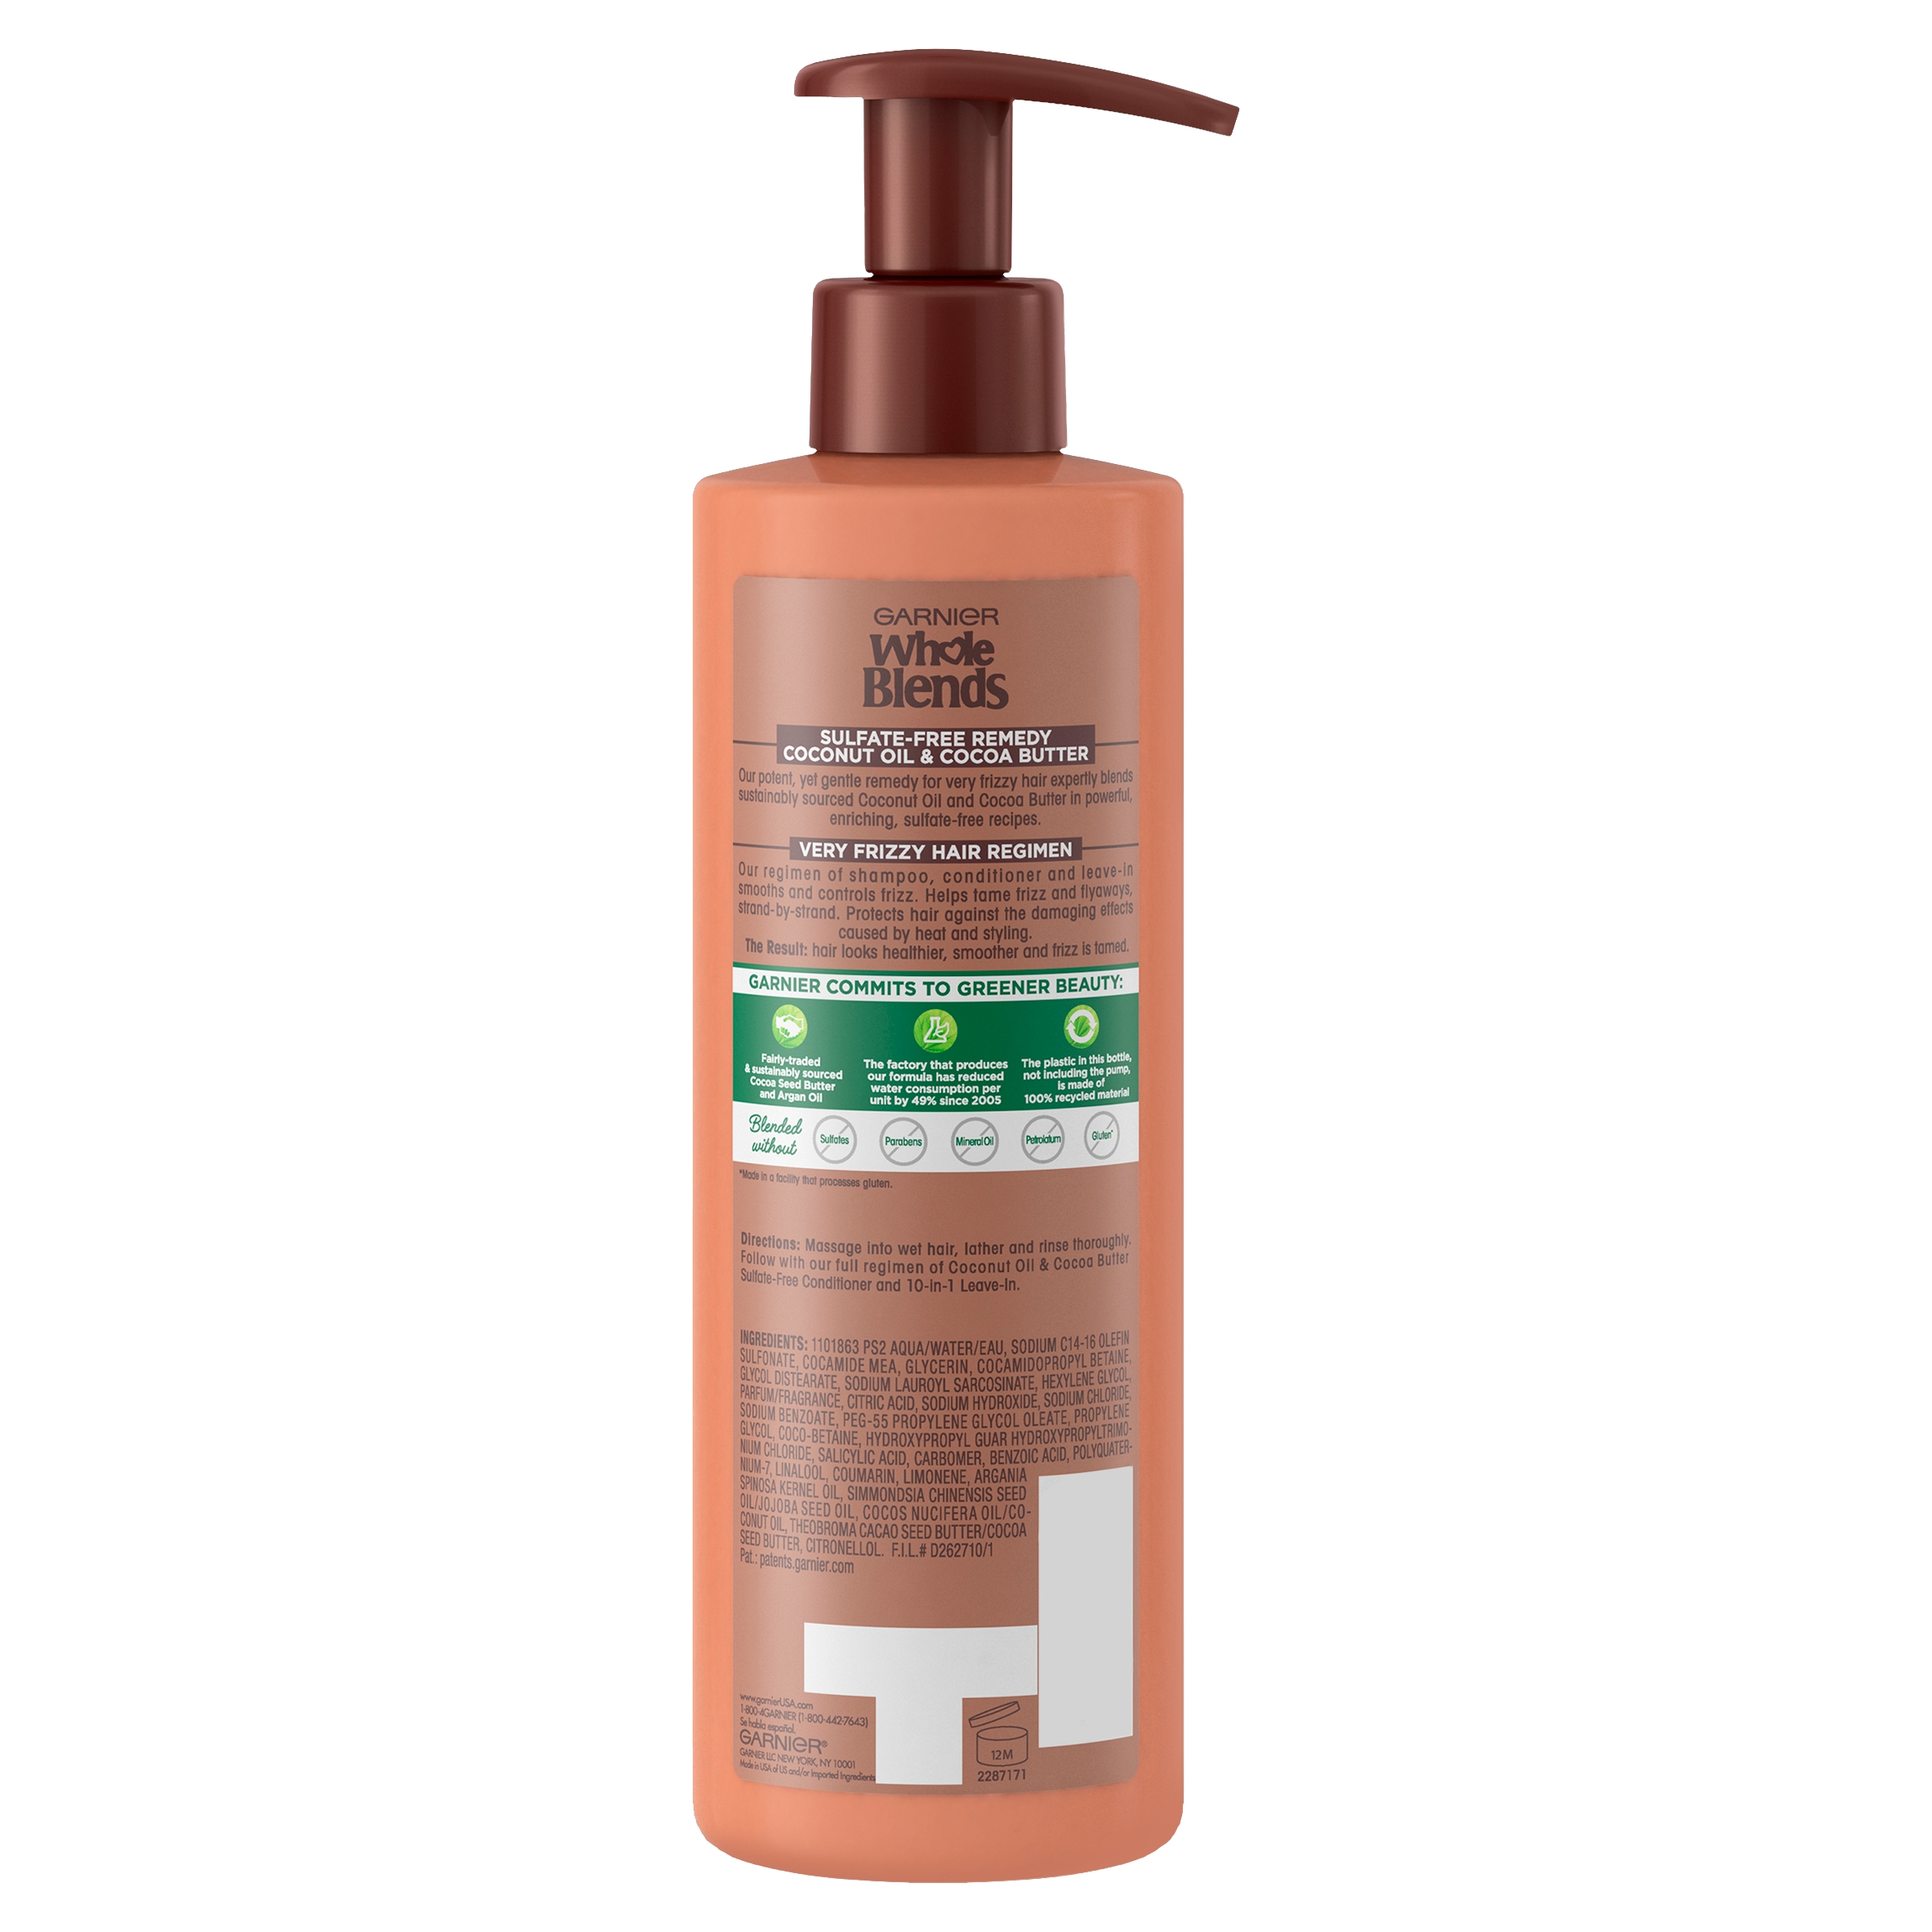 Garnier Whole Blends Taming Shampoo with Coconut Oil Cocoa Butter, 12 fl oz - image 3 of 11